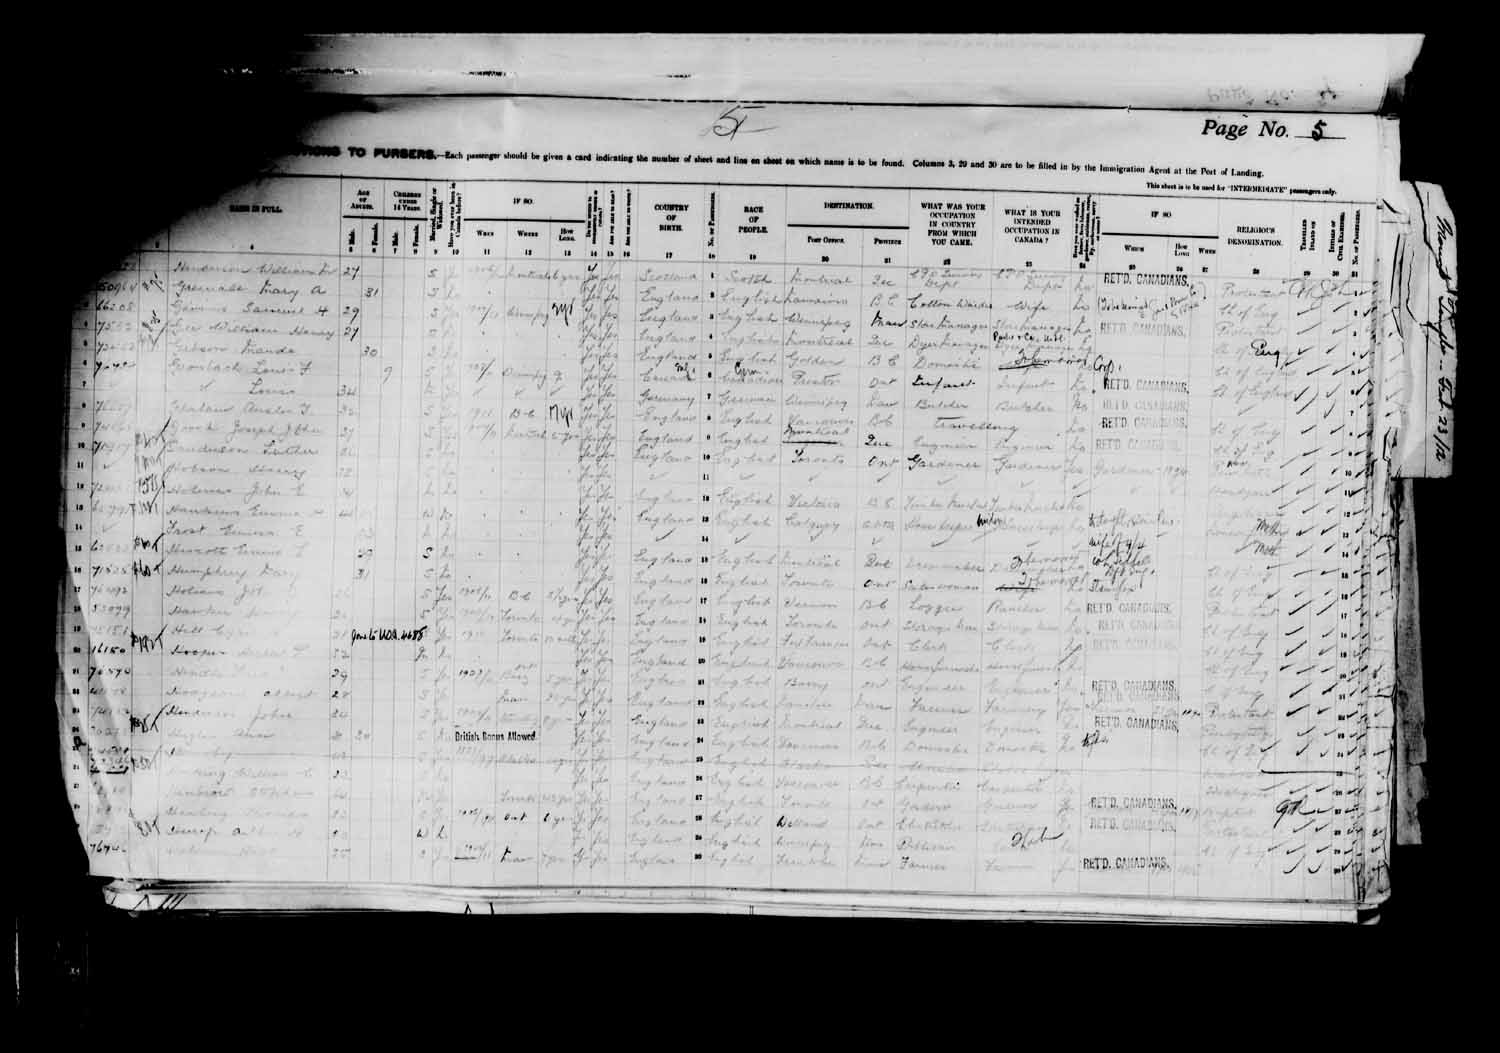 Digitized page of Passenger Lists for Image No.: e003627178